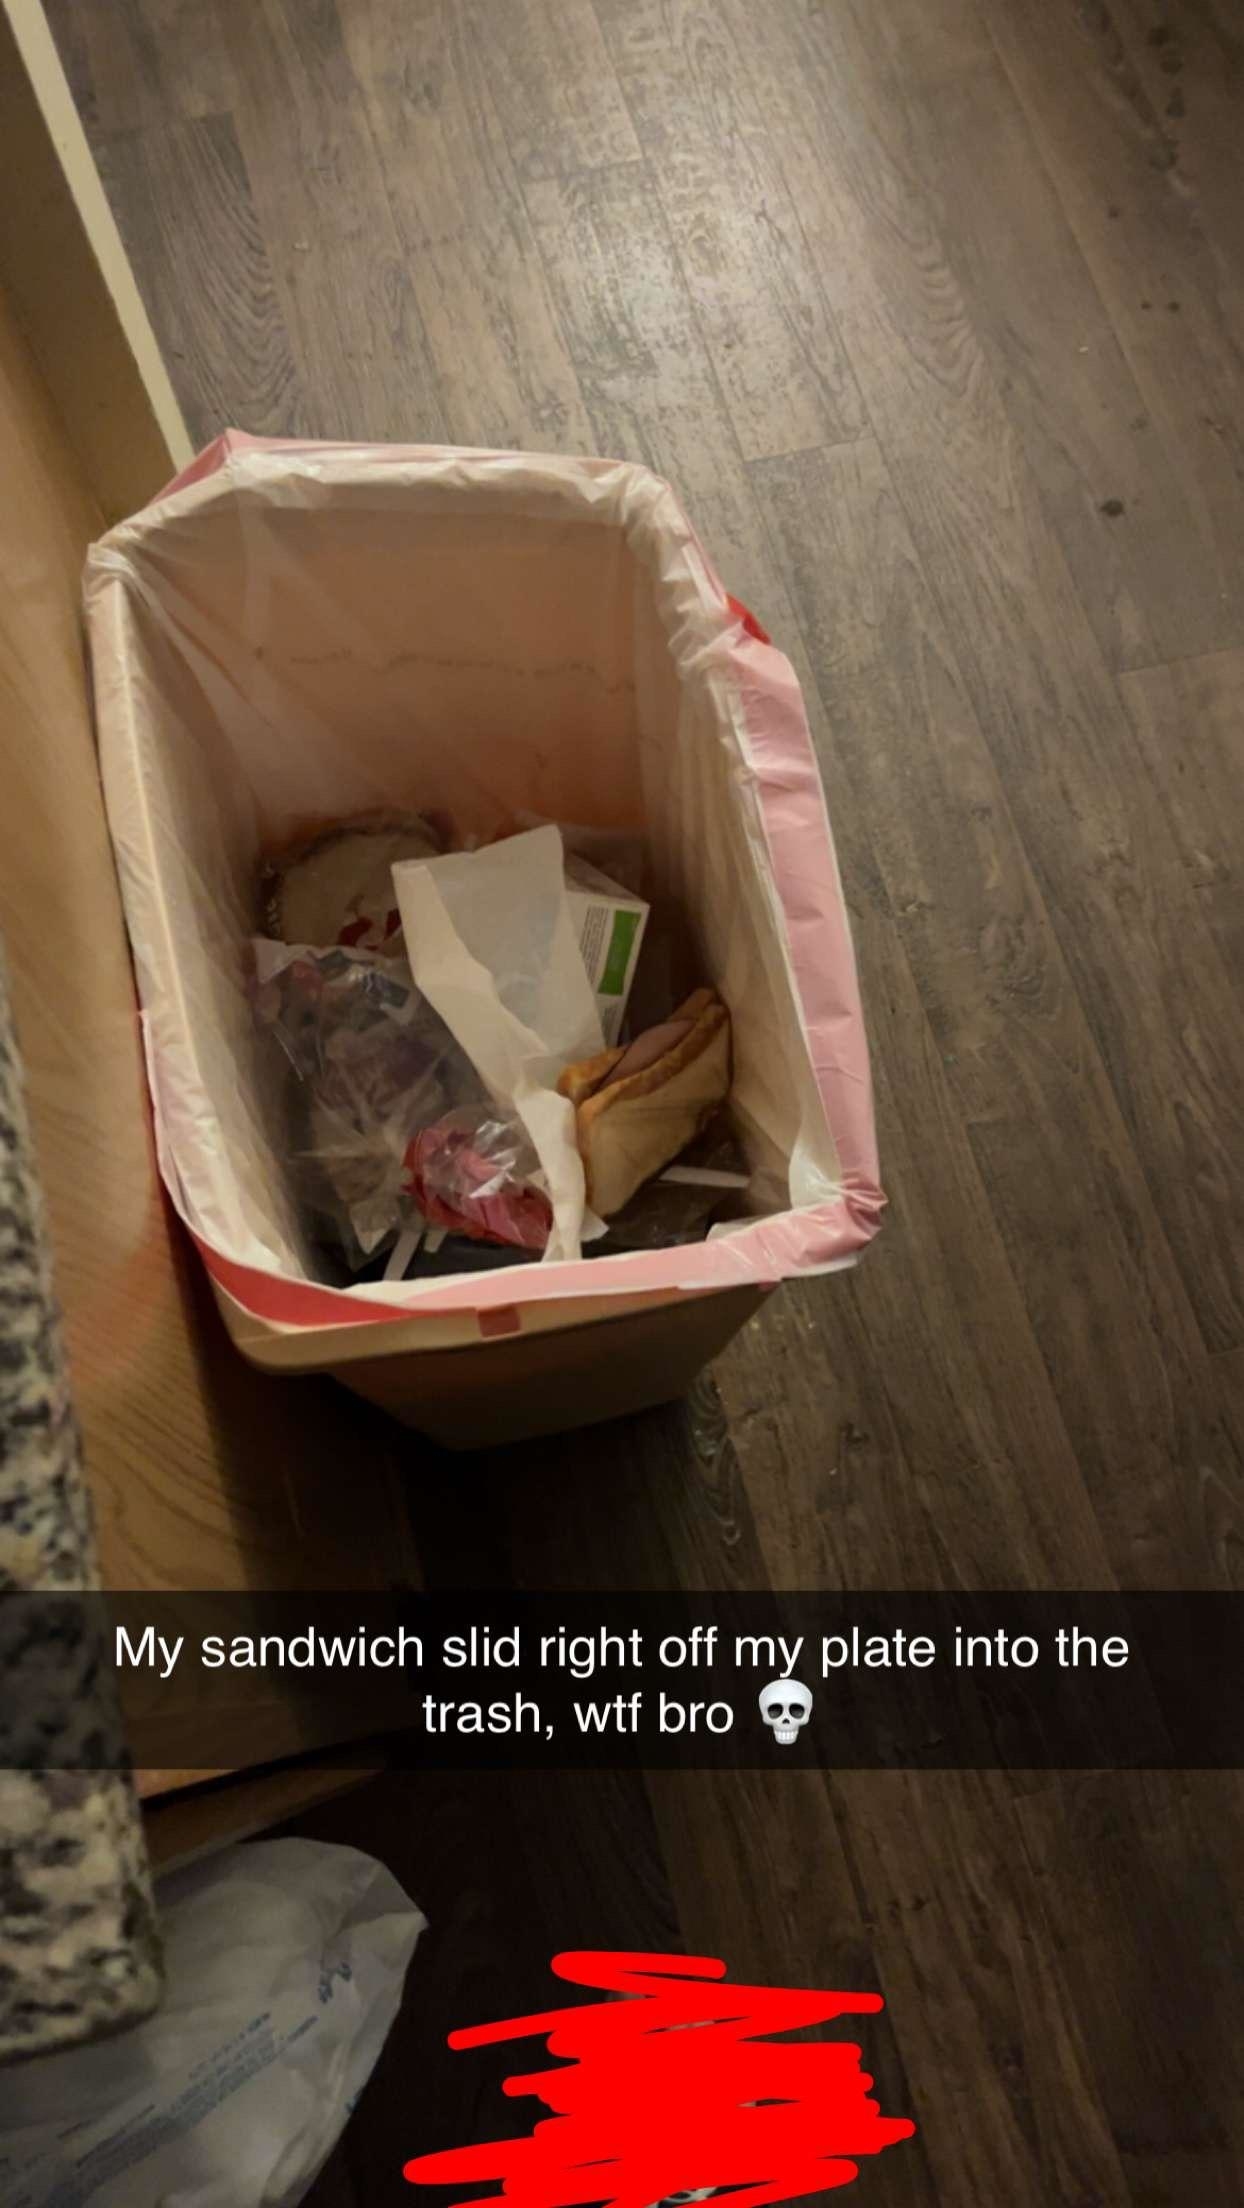 Person stares at trash bin where their sandwich has fallen off the plate. Text expresses dismay at the mishap